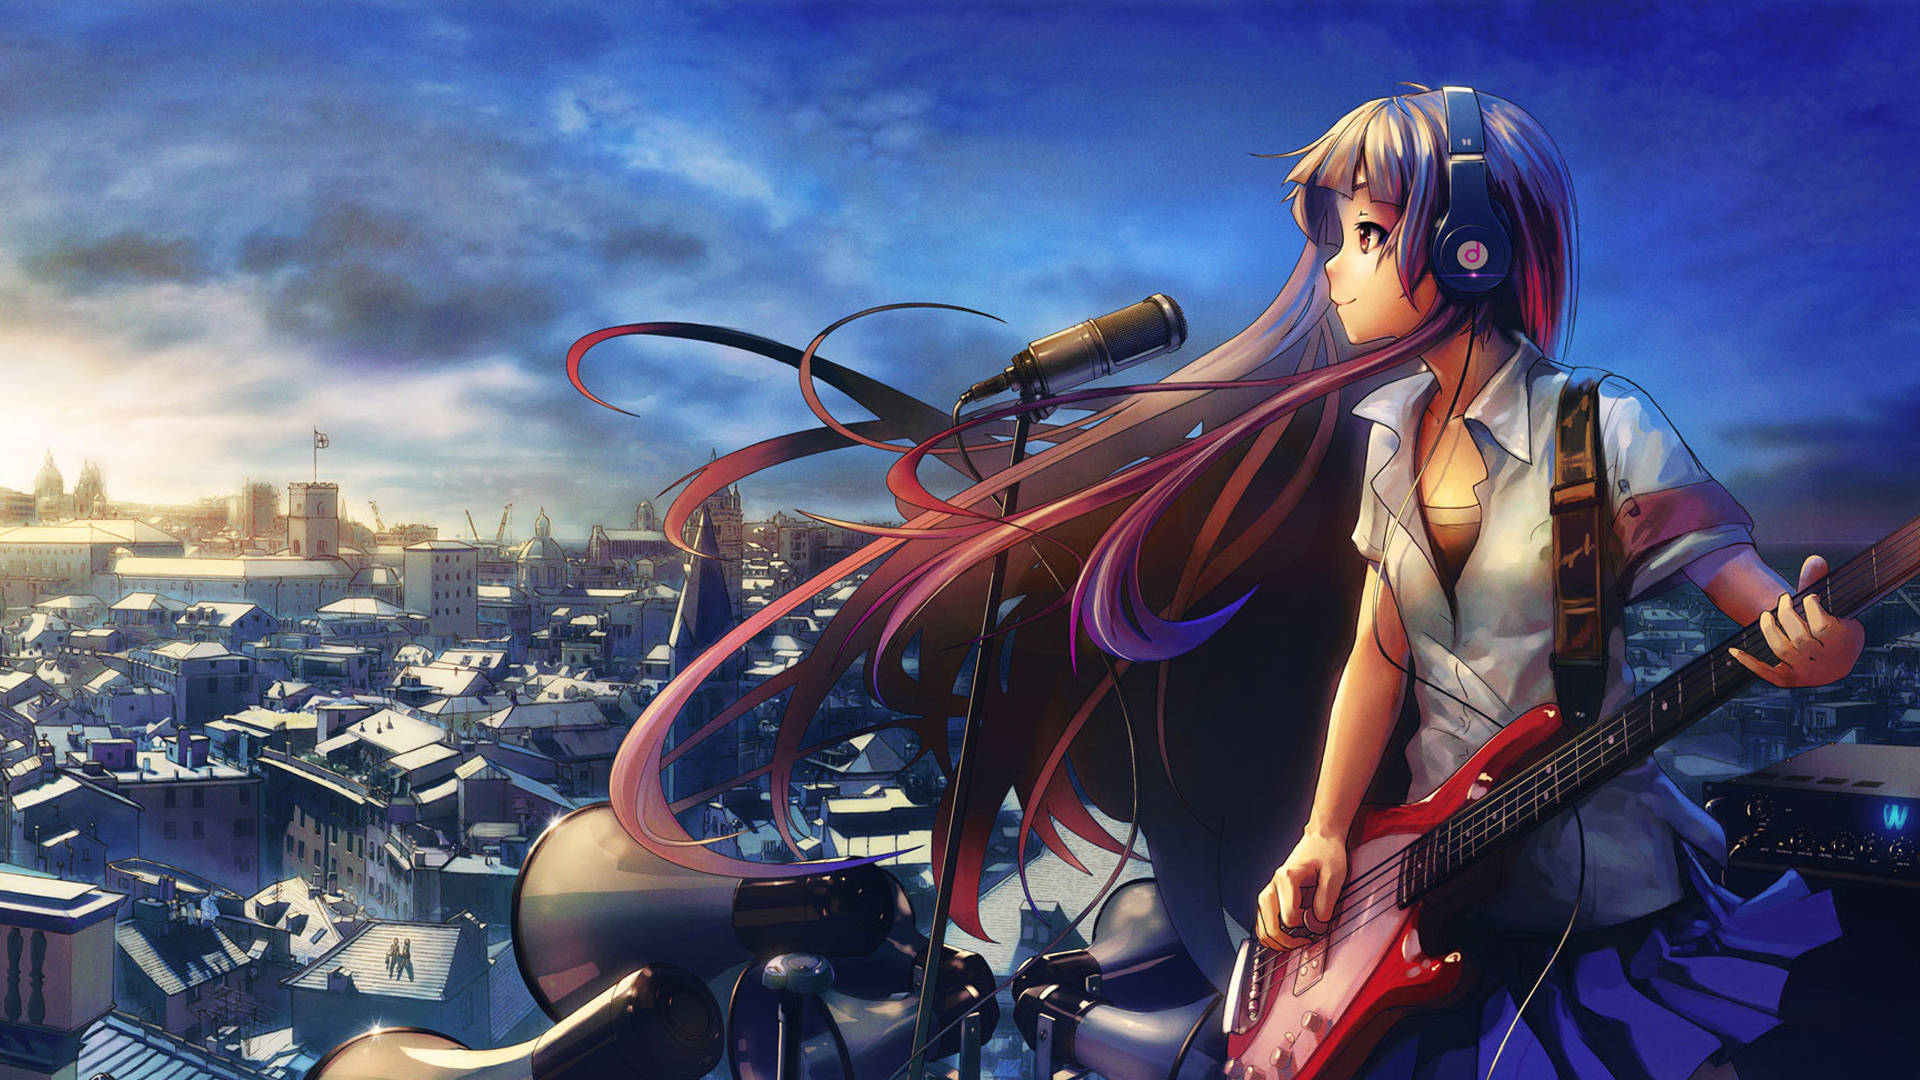 Download 1920x1080 Full Hd Anime Girl Playing Guitar On Rooftop Wallpaper |  